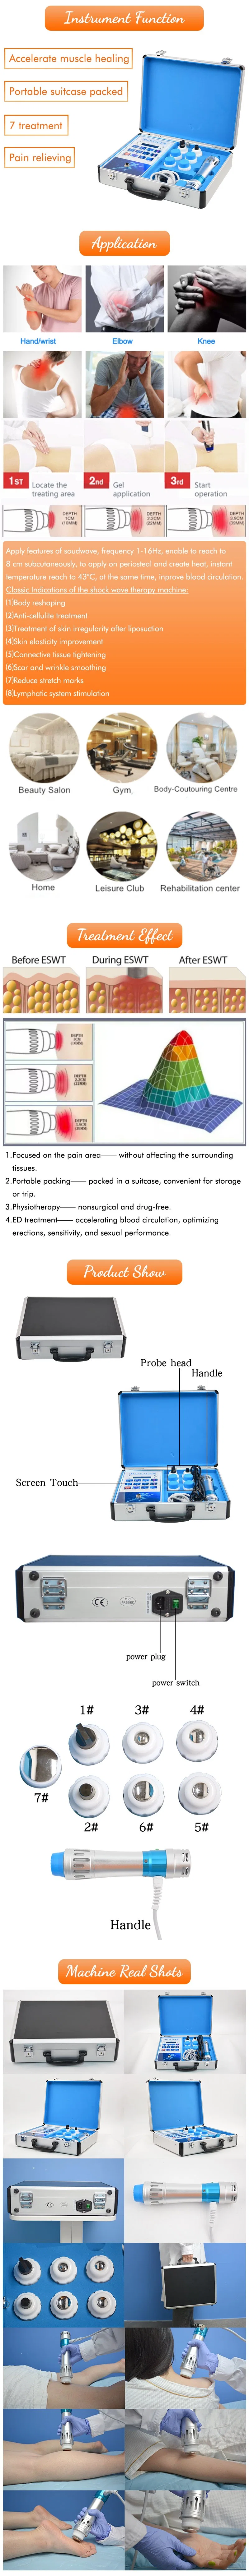 Portable Focused Shockwave Therapy Machine Extracorporeal Shock Wave Equipment for Erectile Dysfunction ED